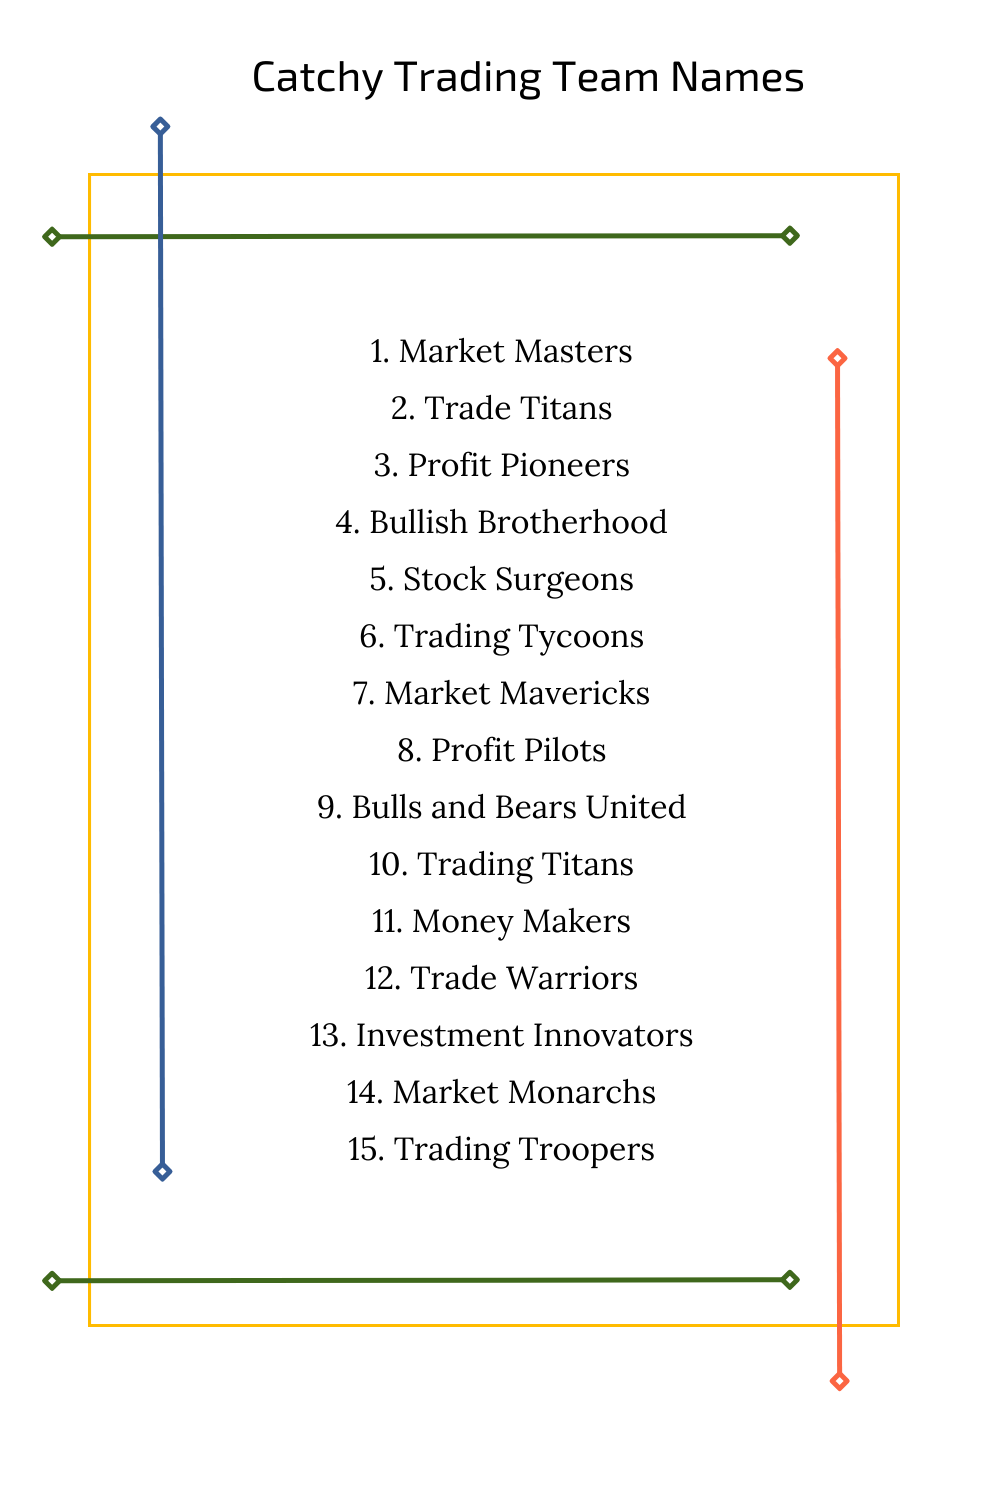 Catchy Trading Team Names